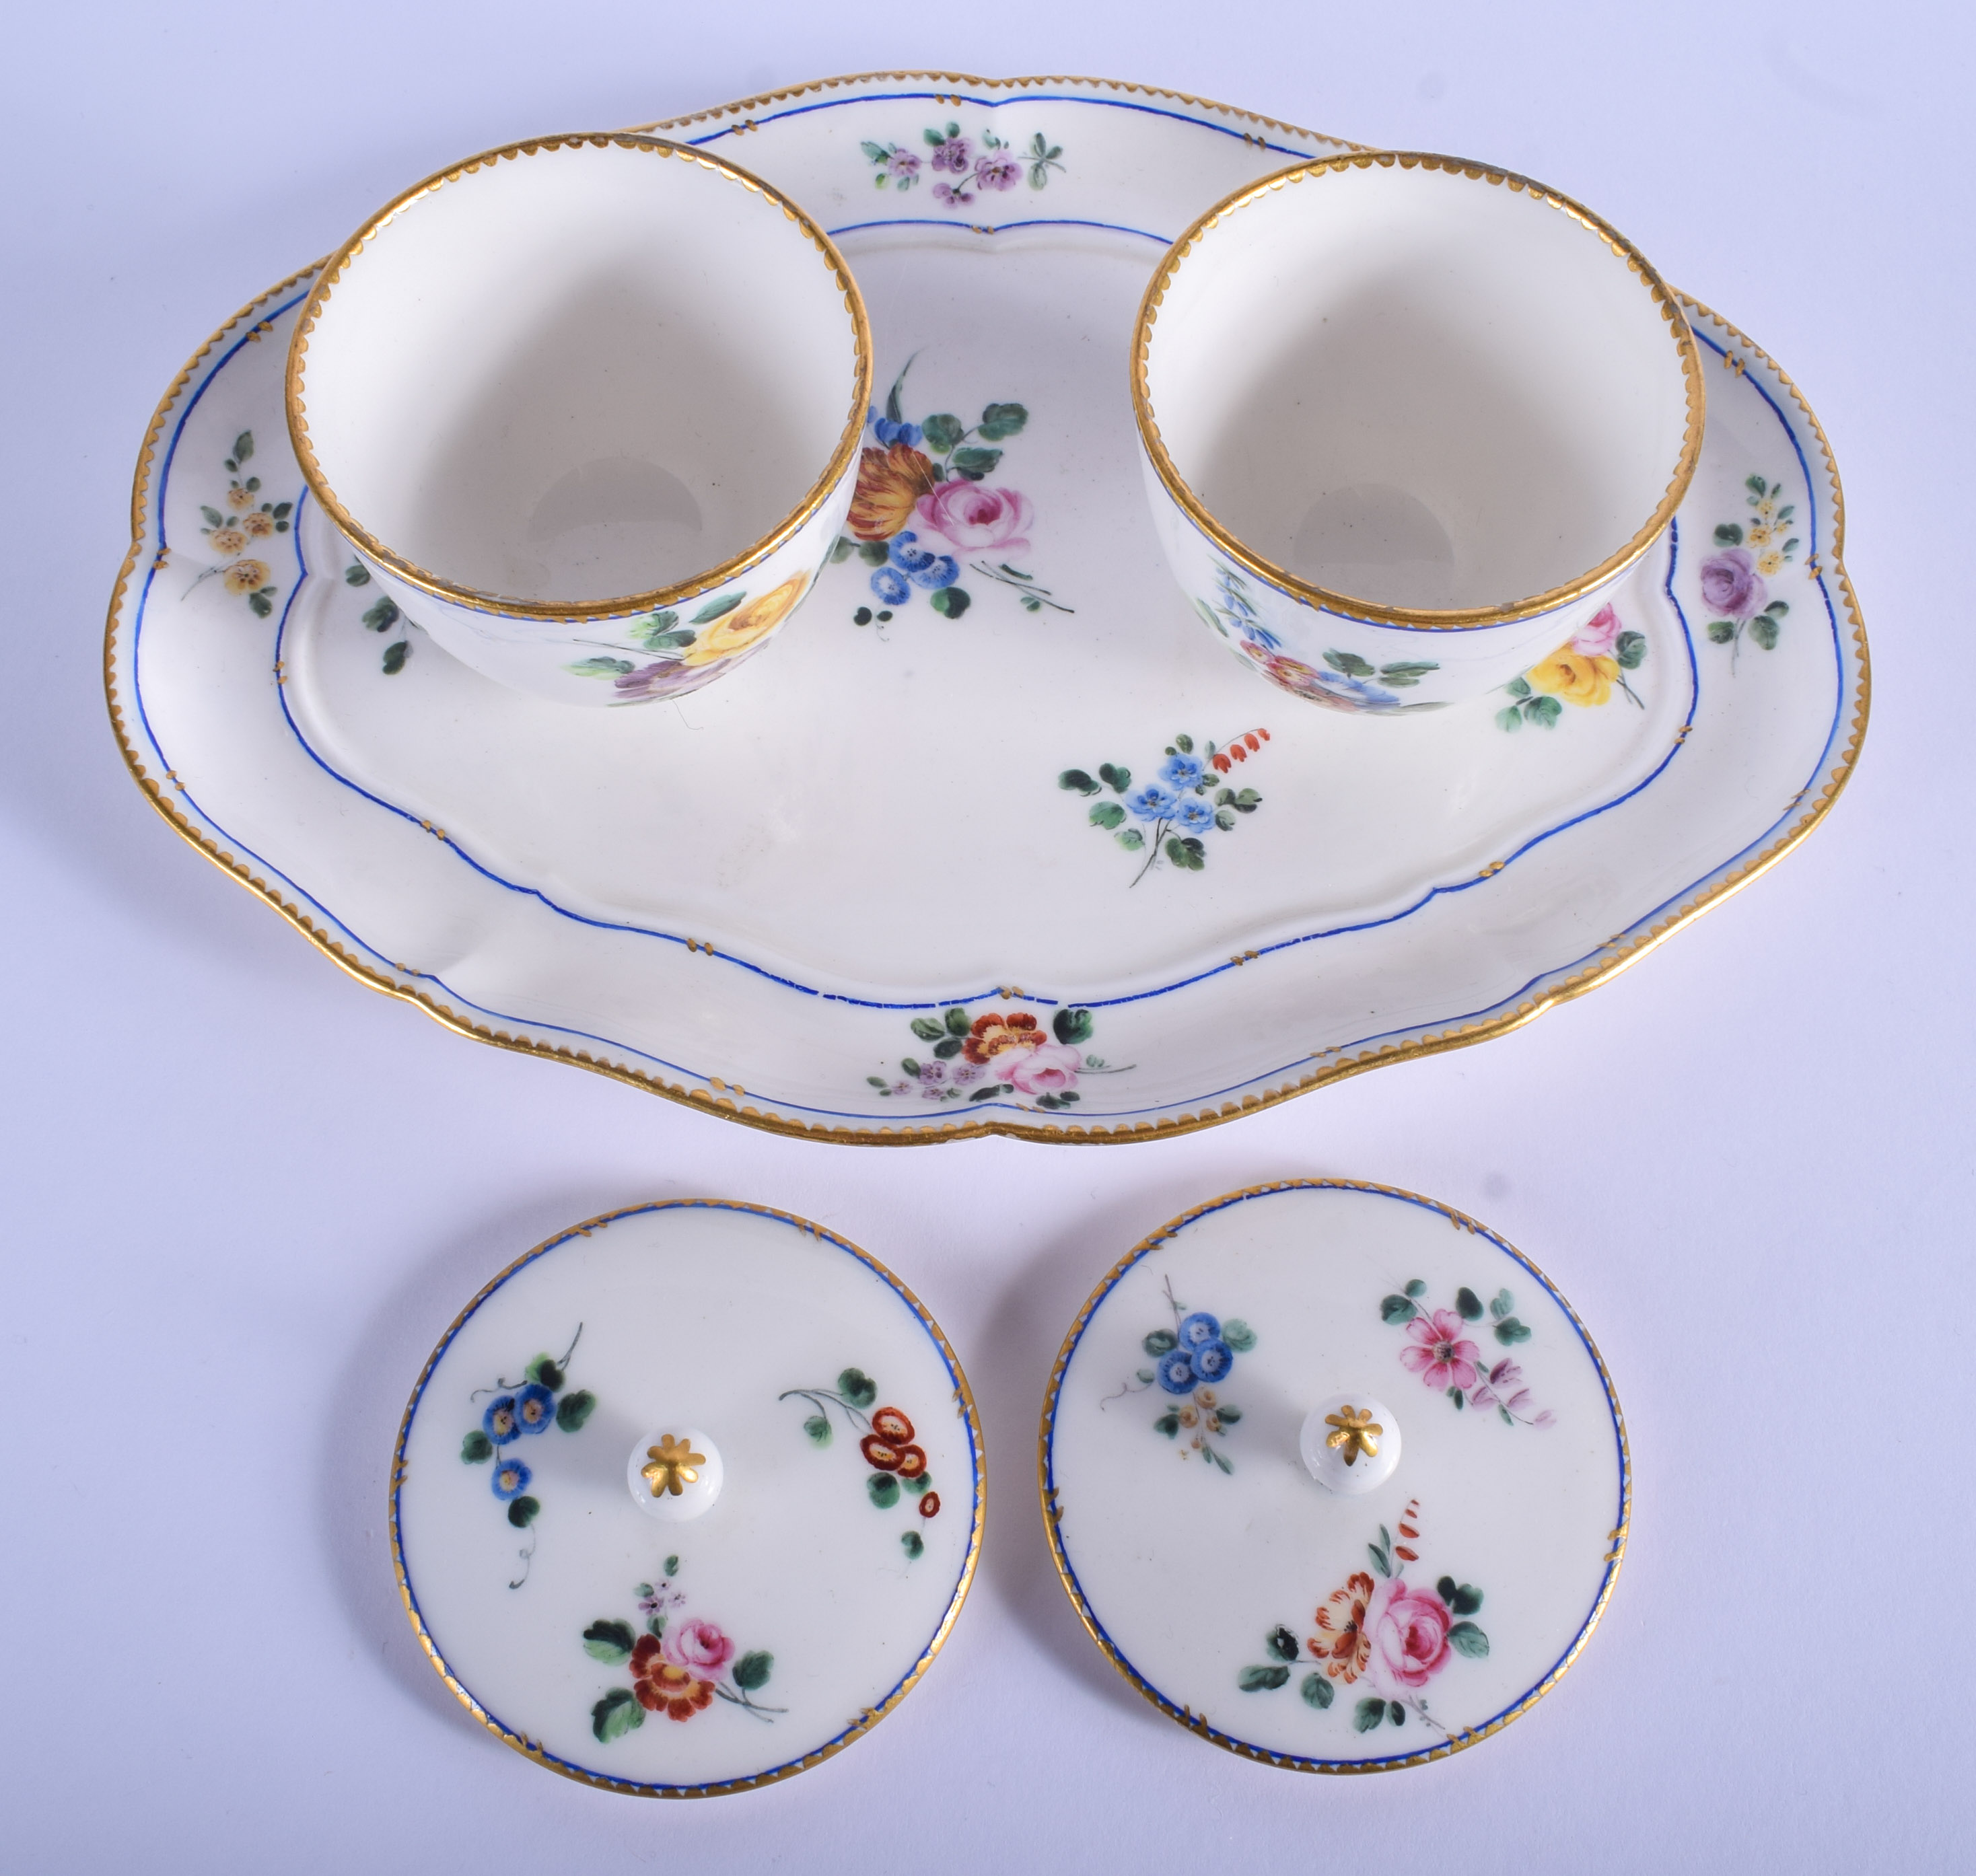 18th c. Sevres double preserve-stand and two covers (plateau a deux pots de confitures) painted wi - Image 3 of 4